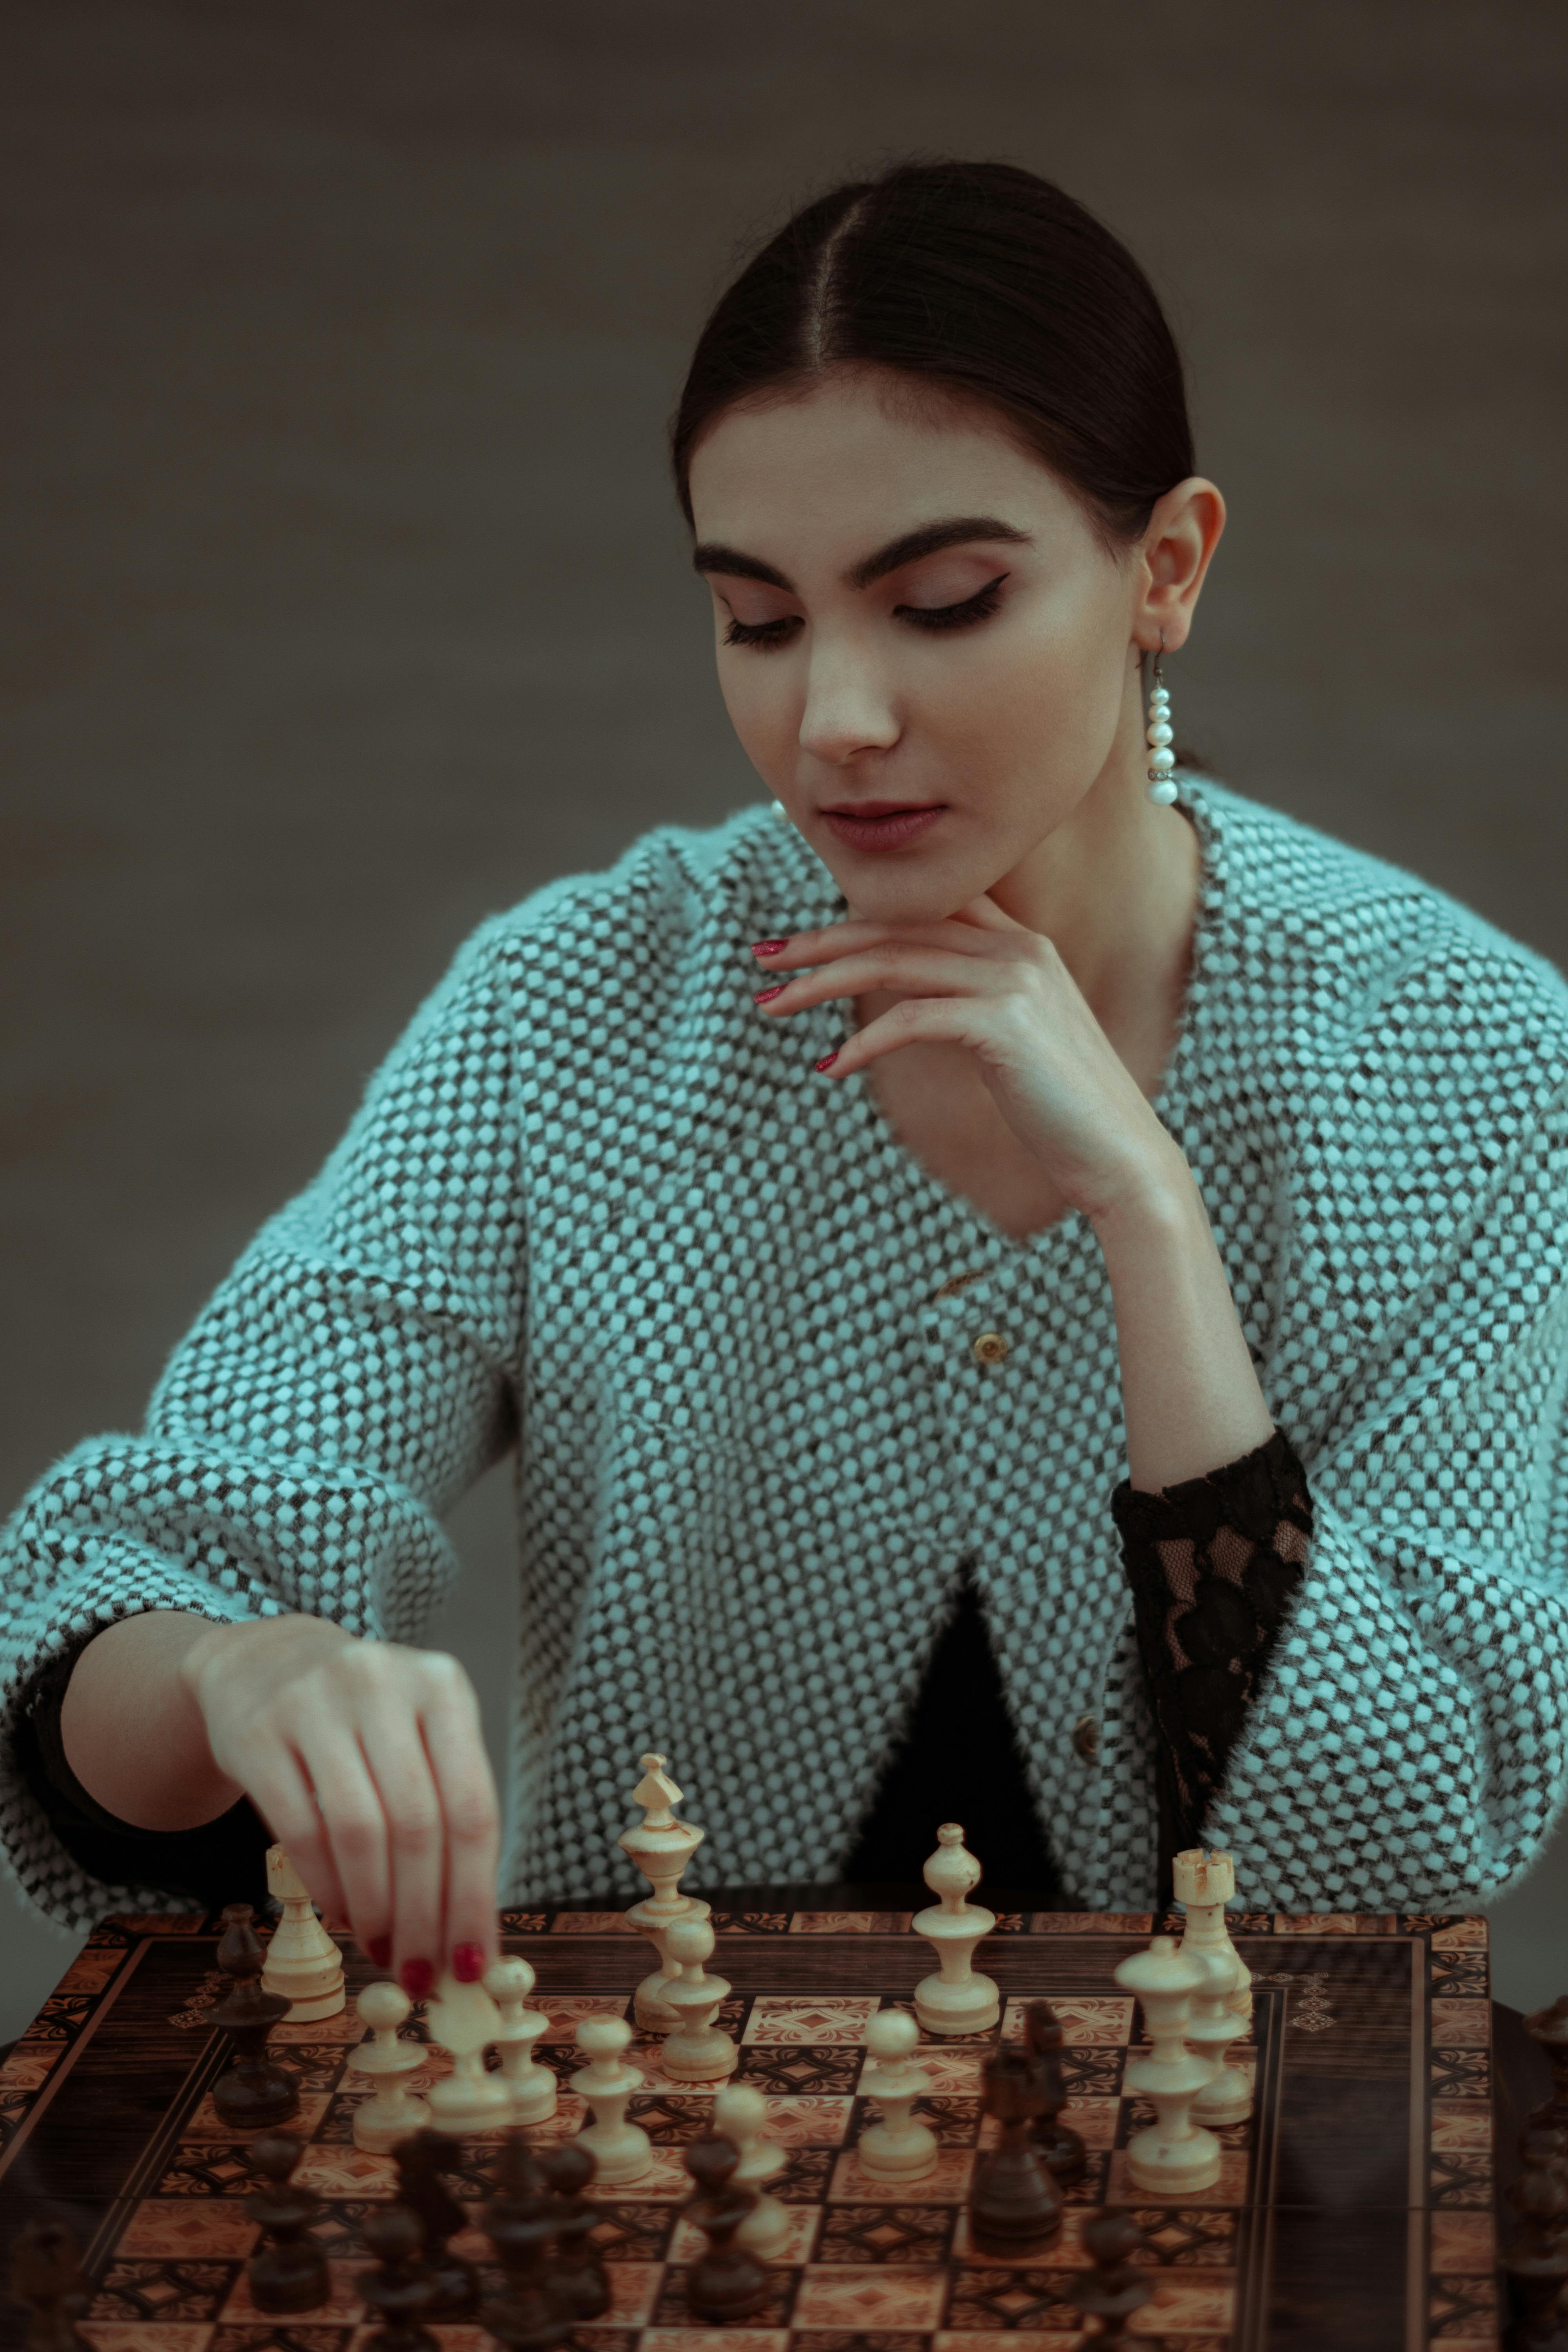 Focused woman thinking about next move and playing chess · Free Stock Photo